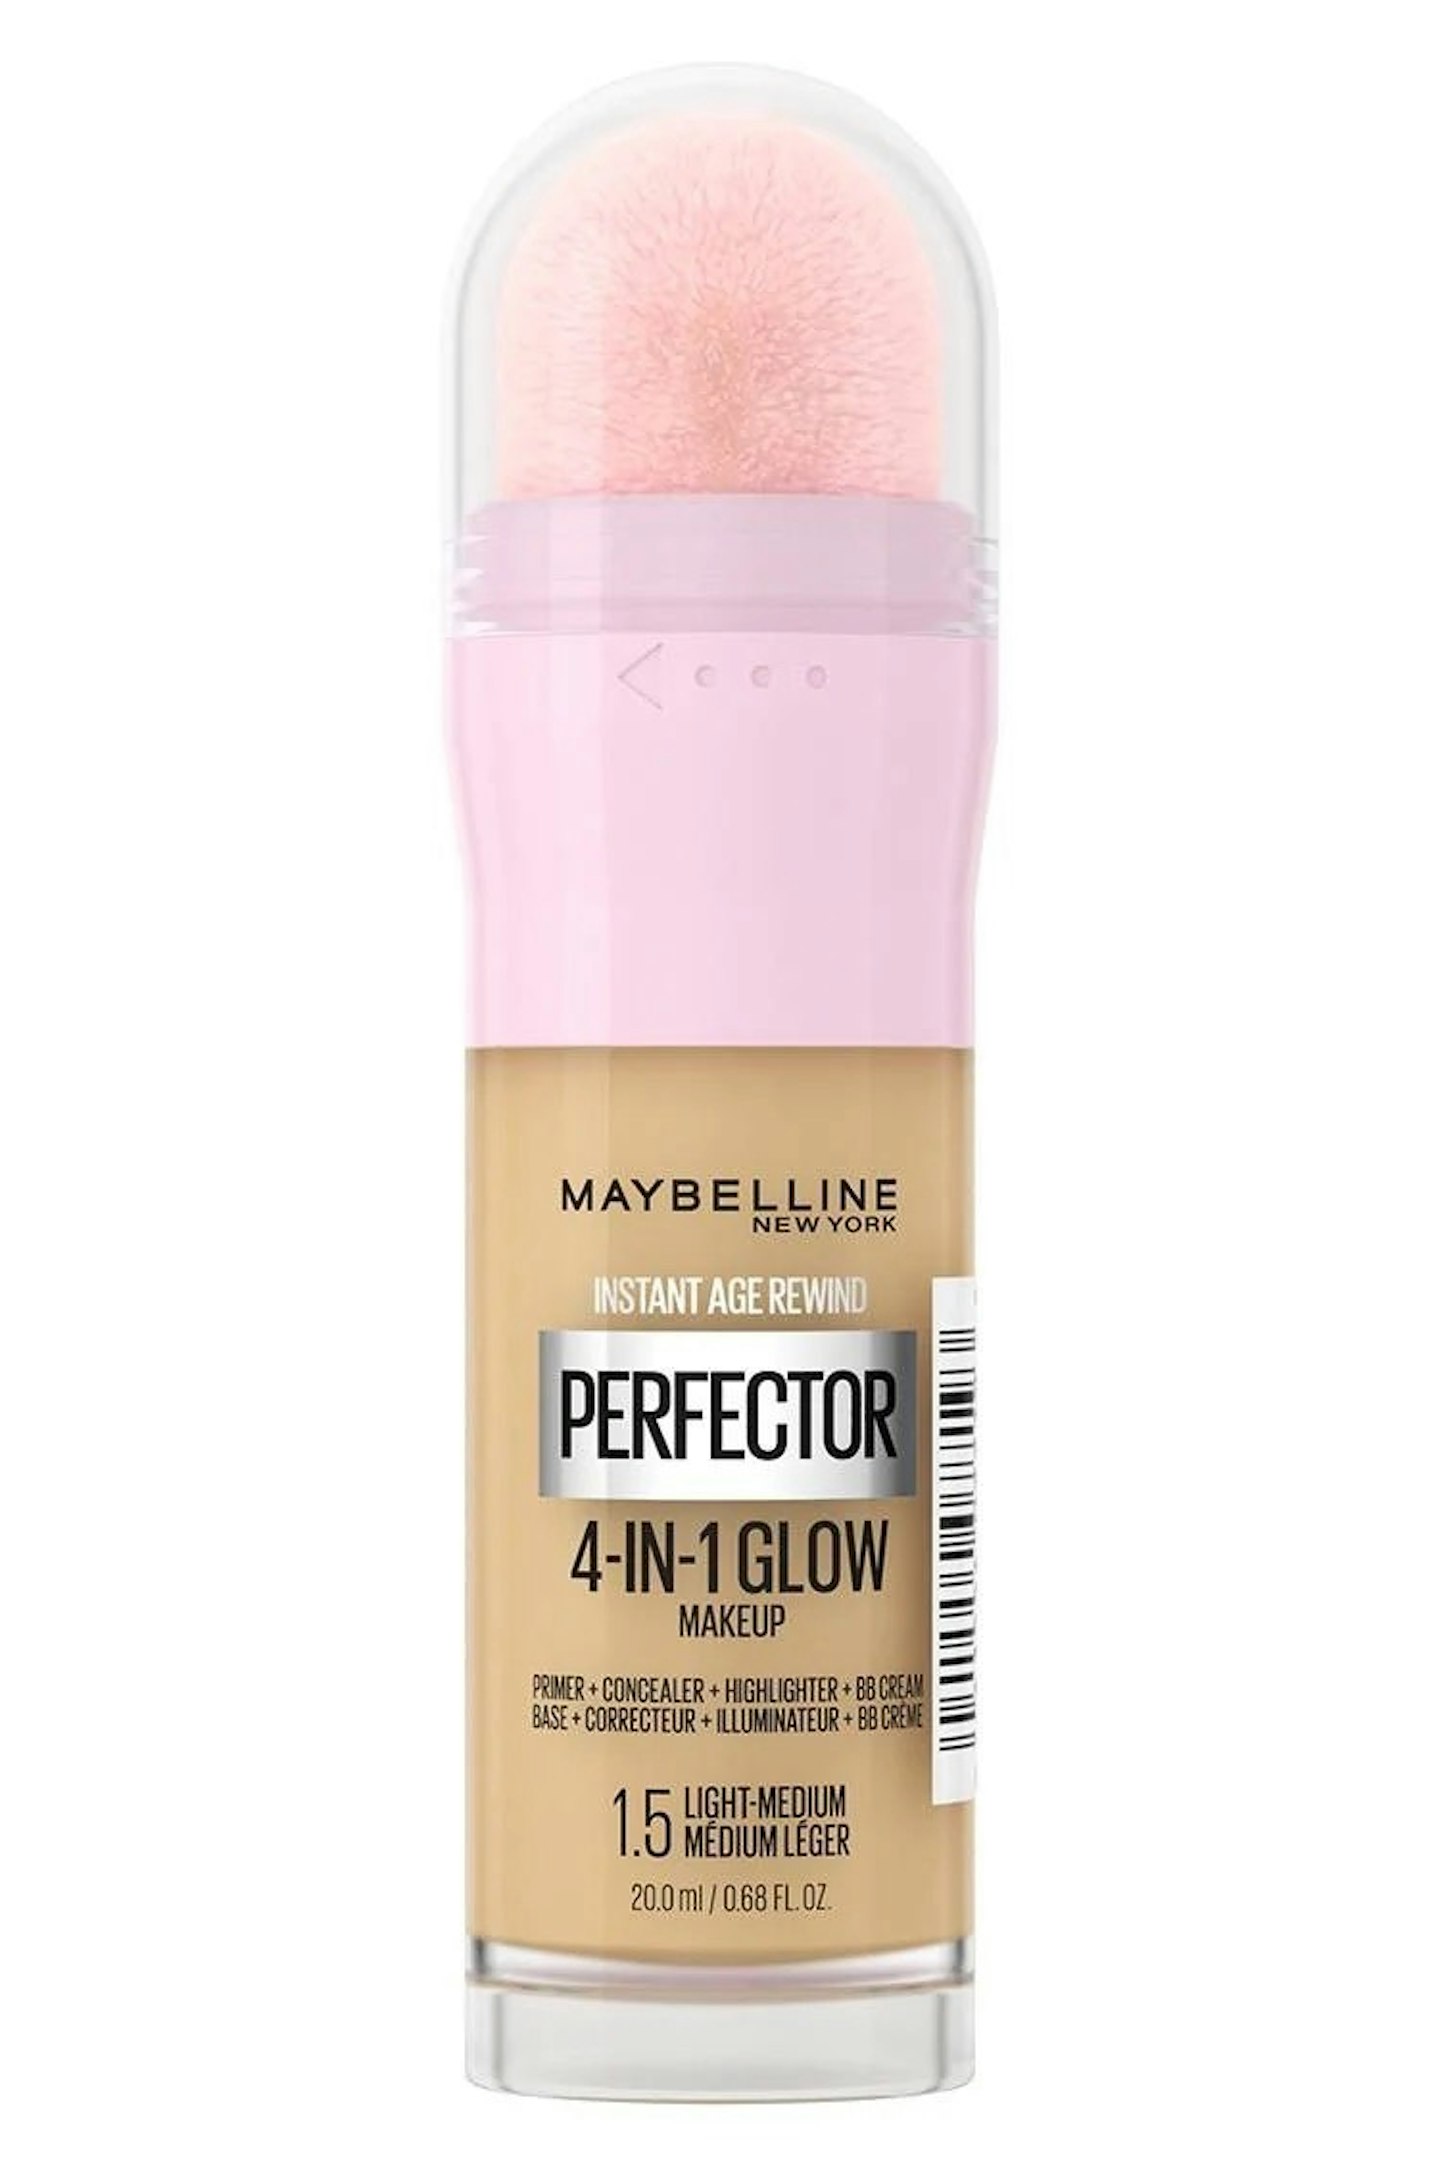 Maybelline Instant Anti Age Perfector 4-IN-1 Glow, £12.99,